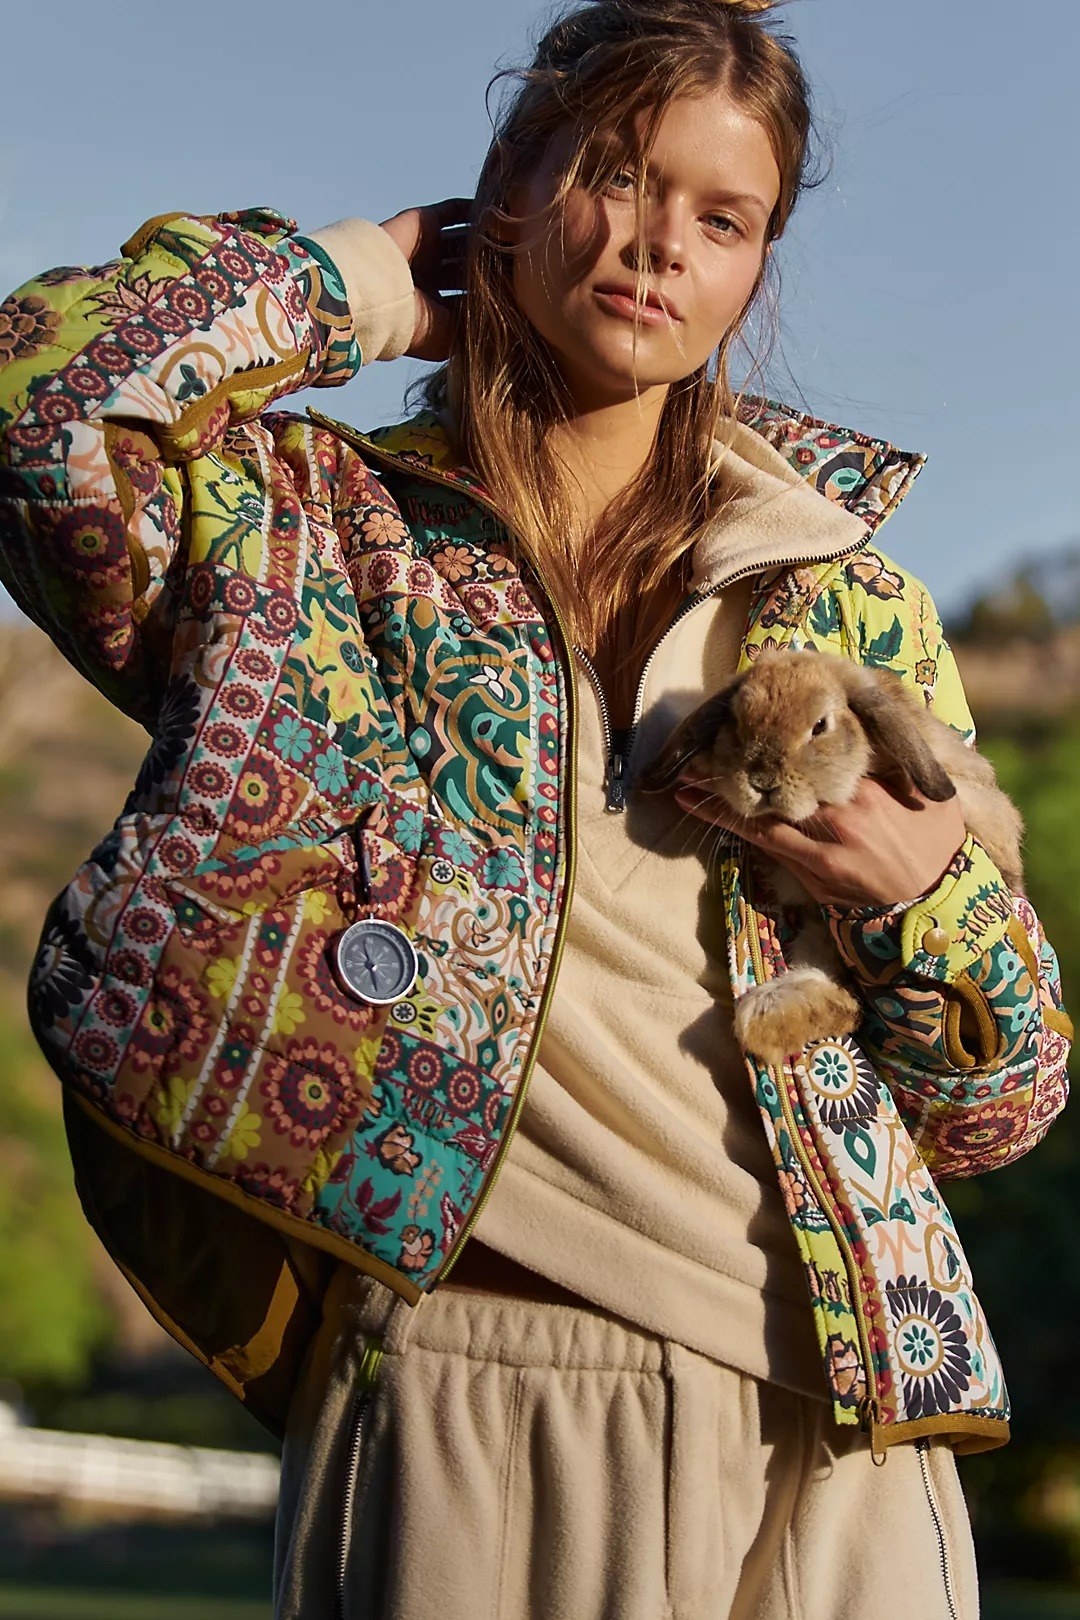 a model wearing the colorful patterned jacket while holding a rabbit